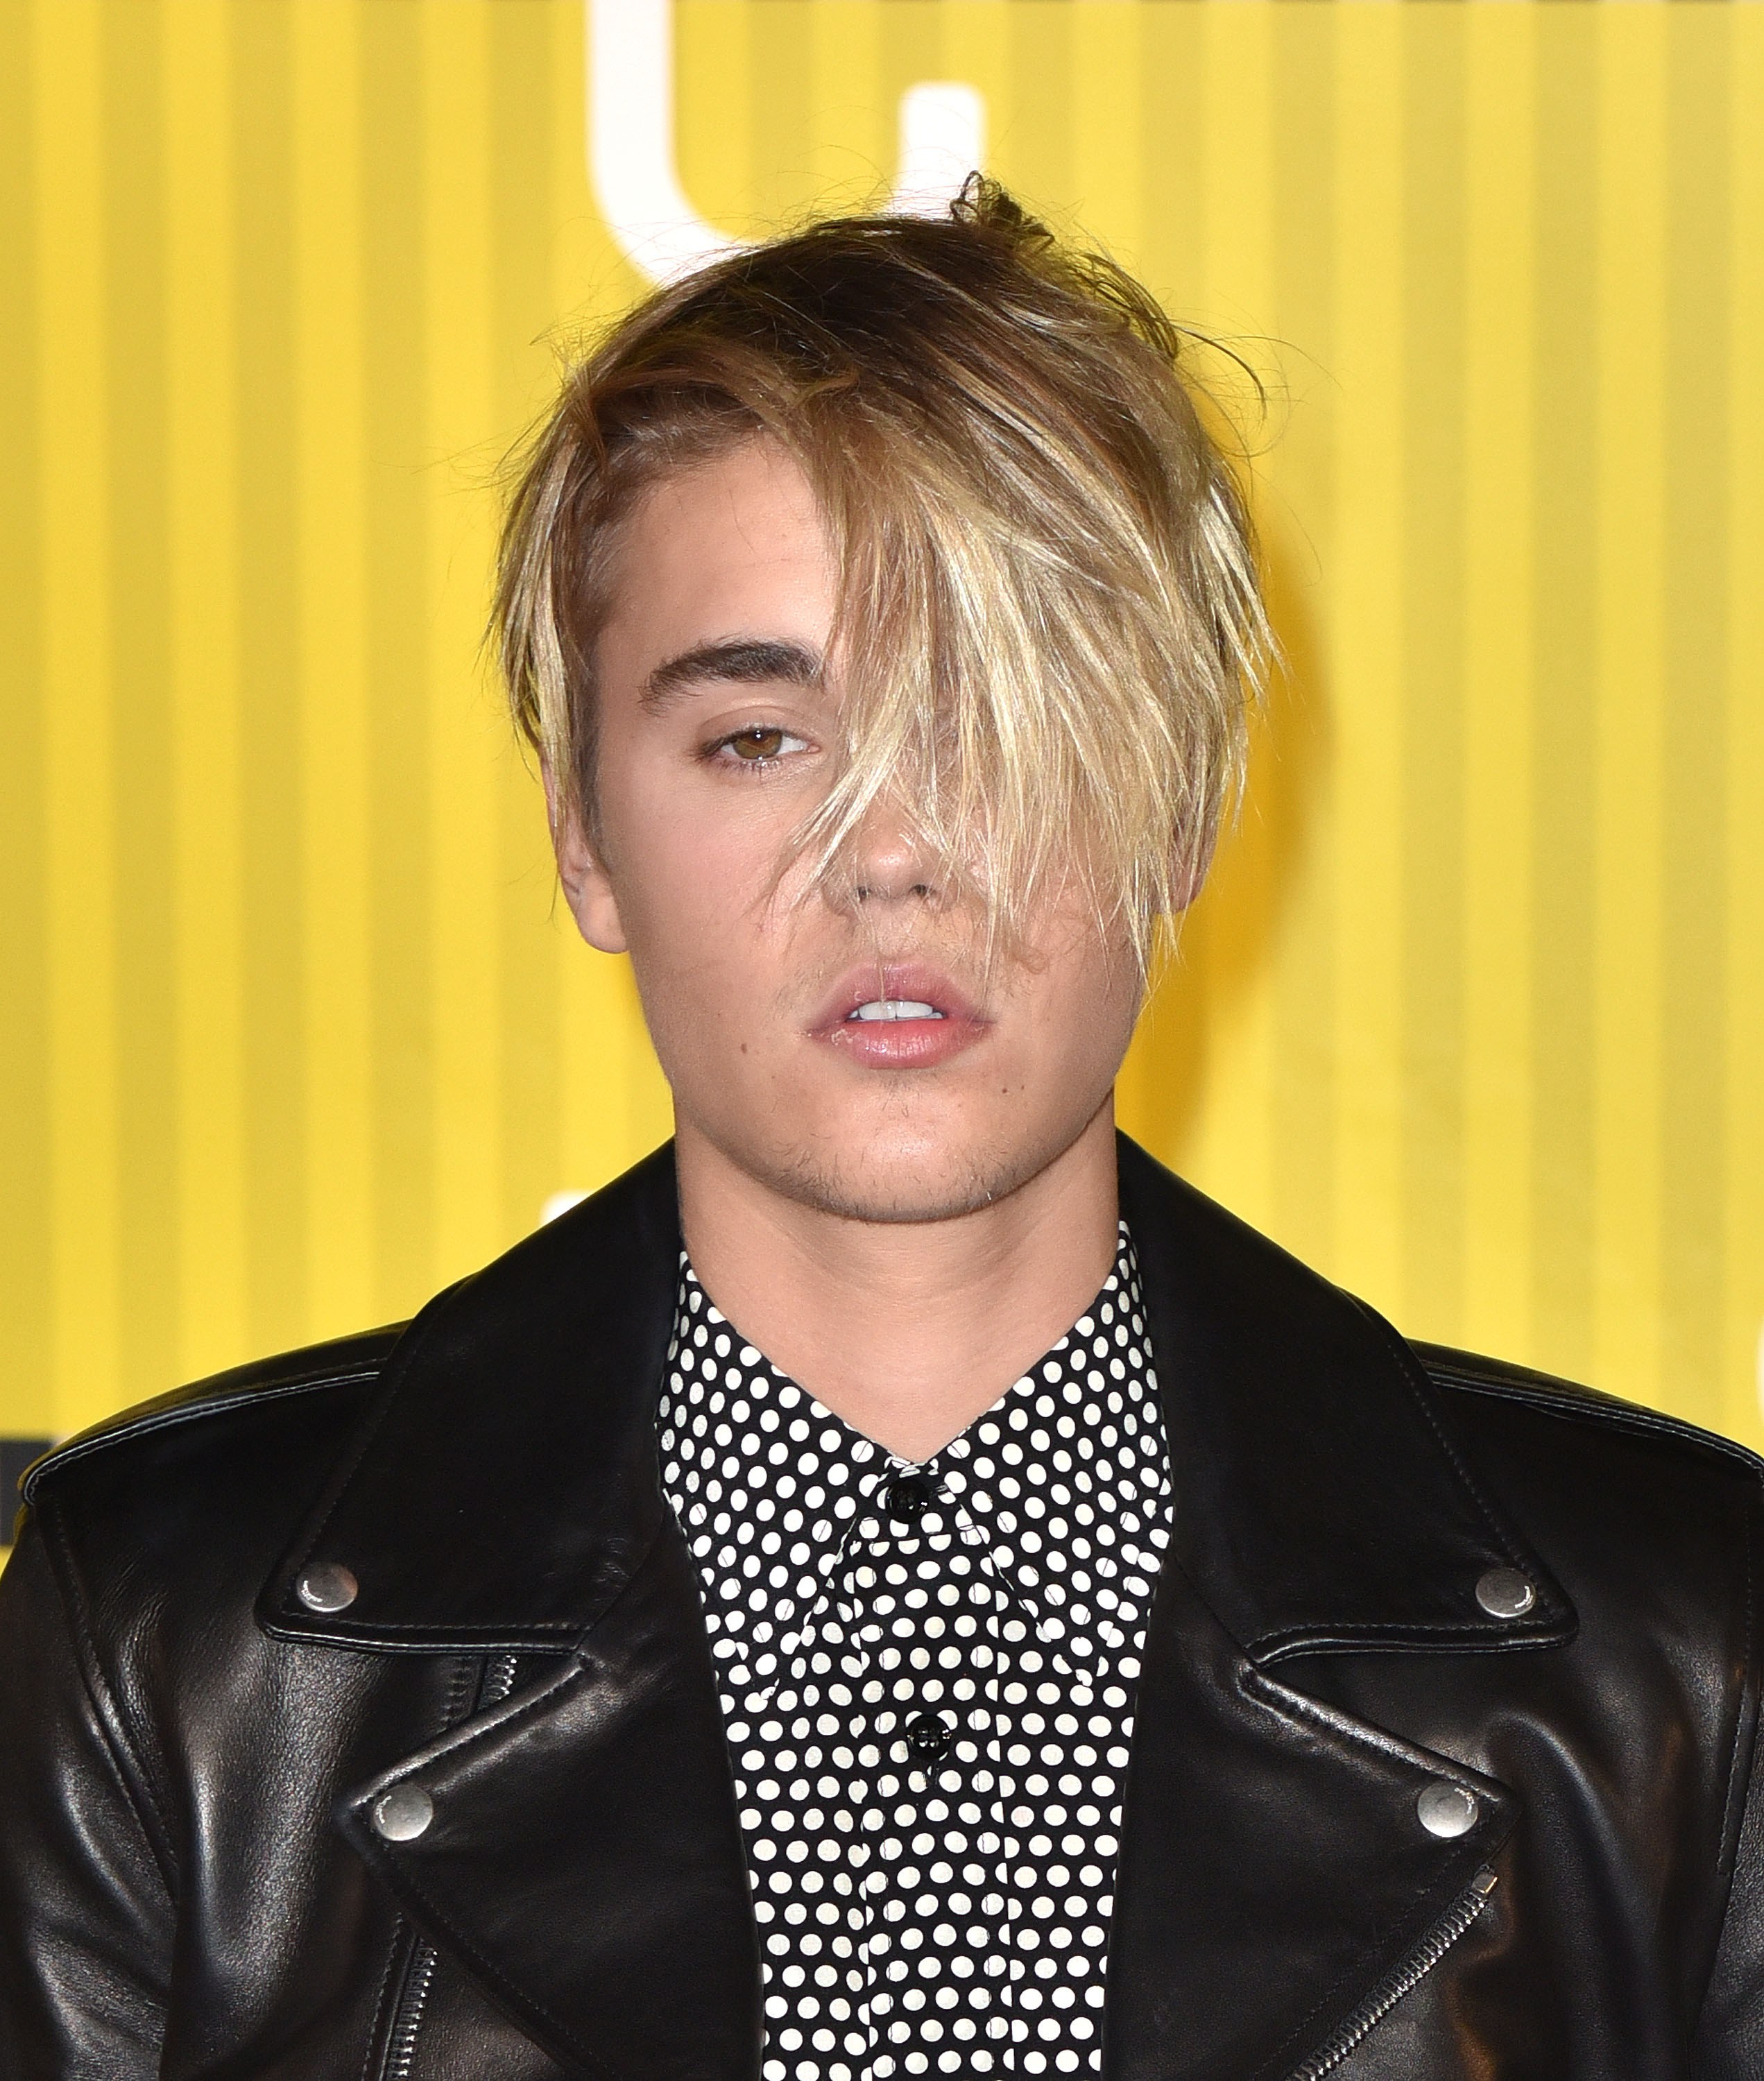 Justin Bieber hairstyle: Short sides, thick top. The hazards of the  cockatiel.